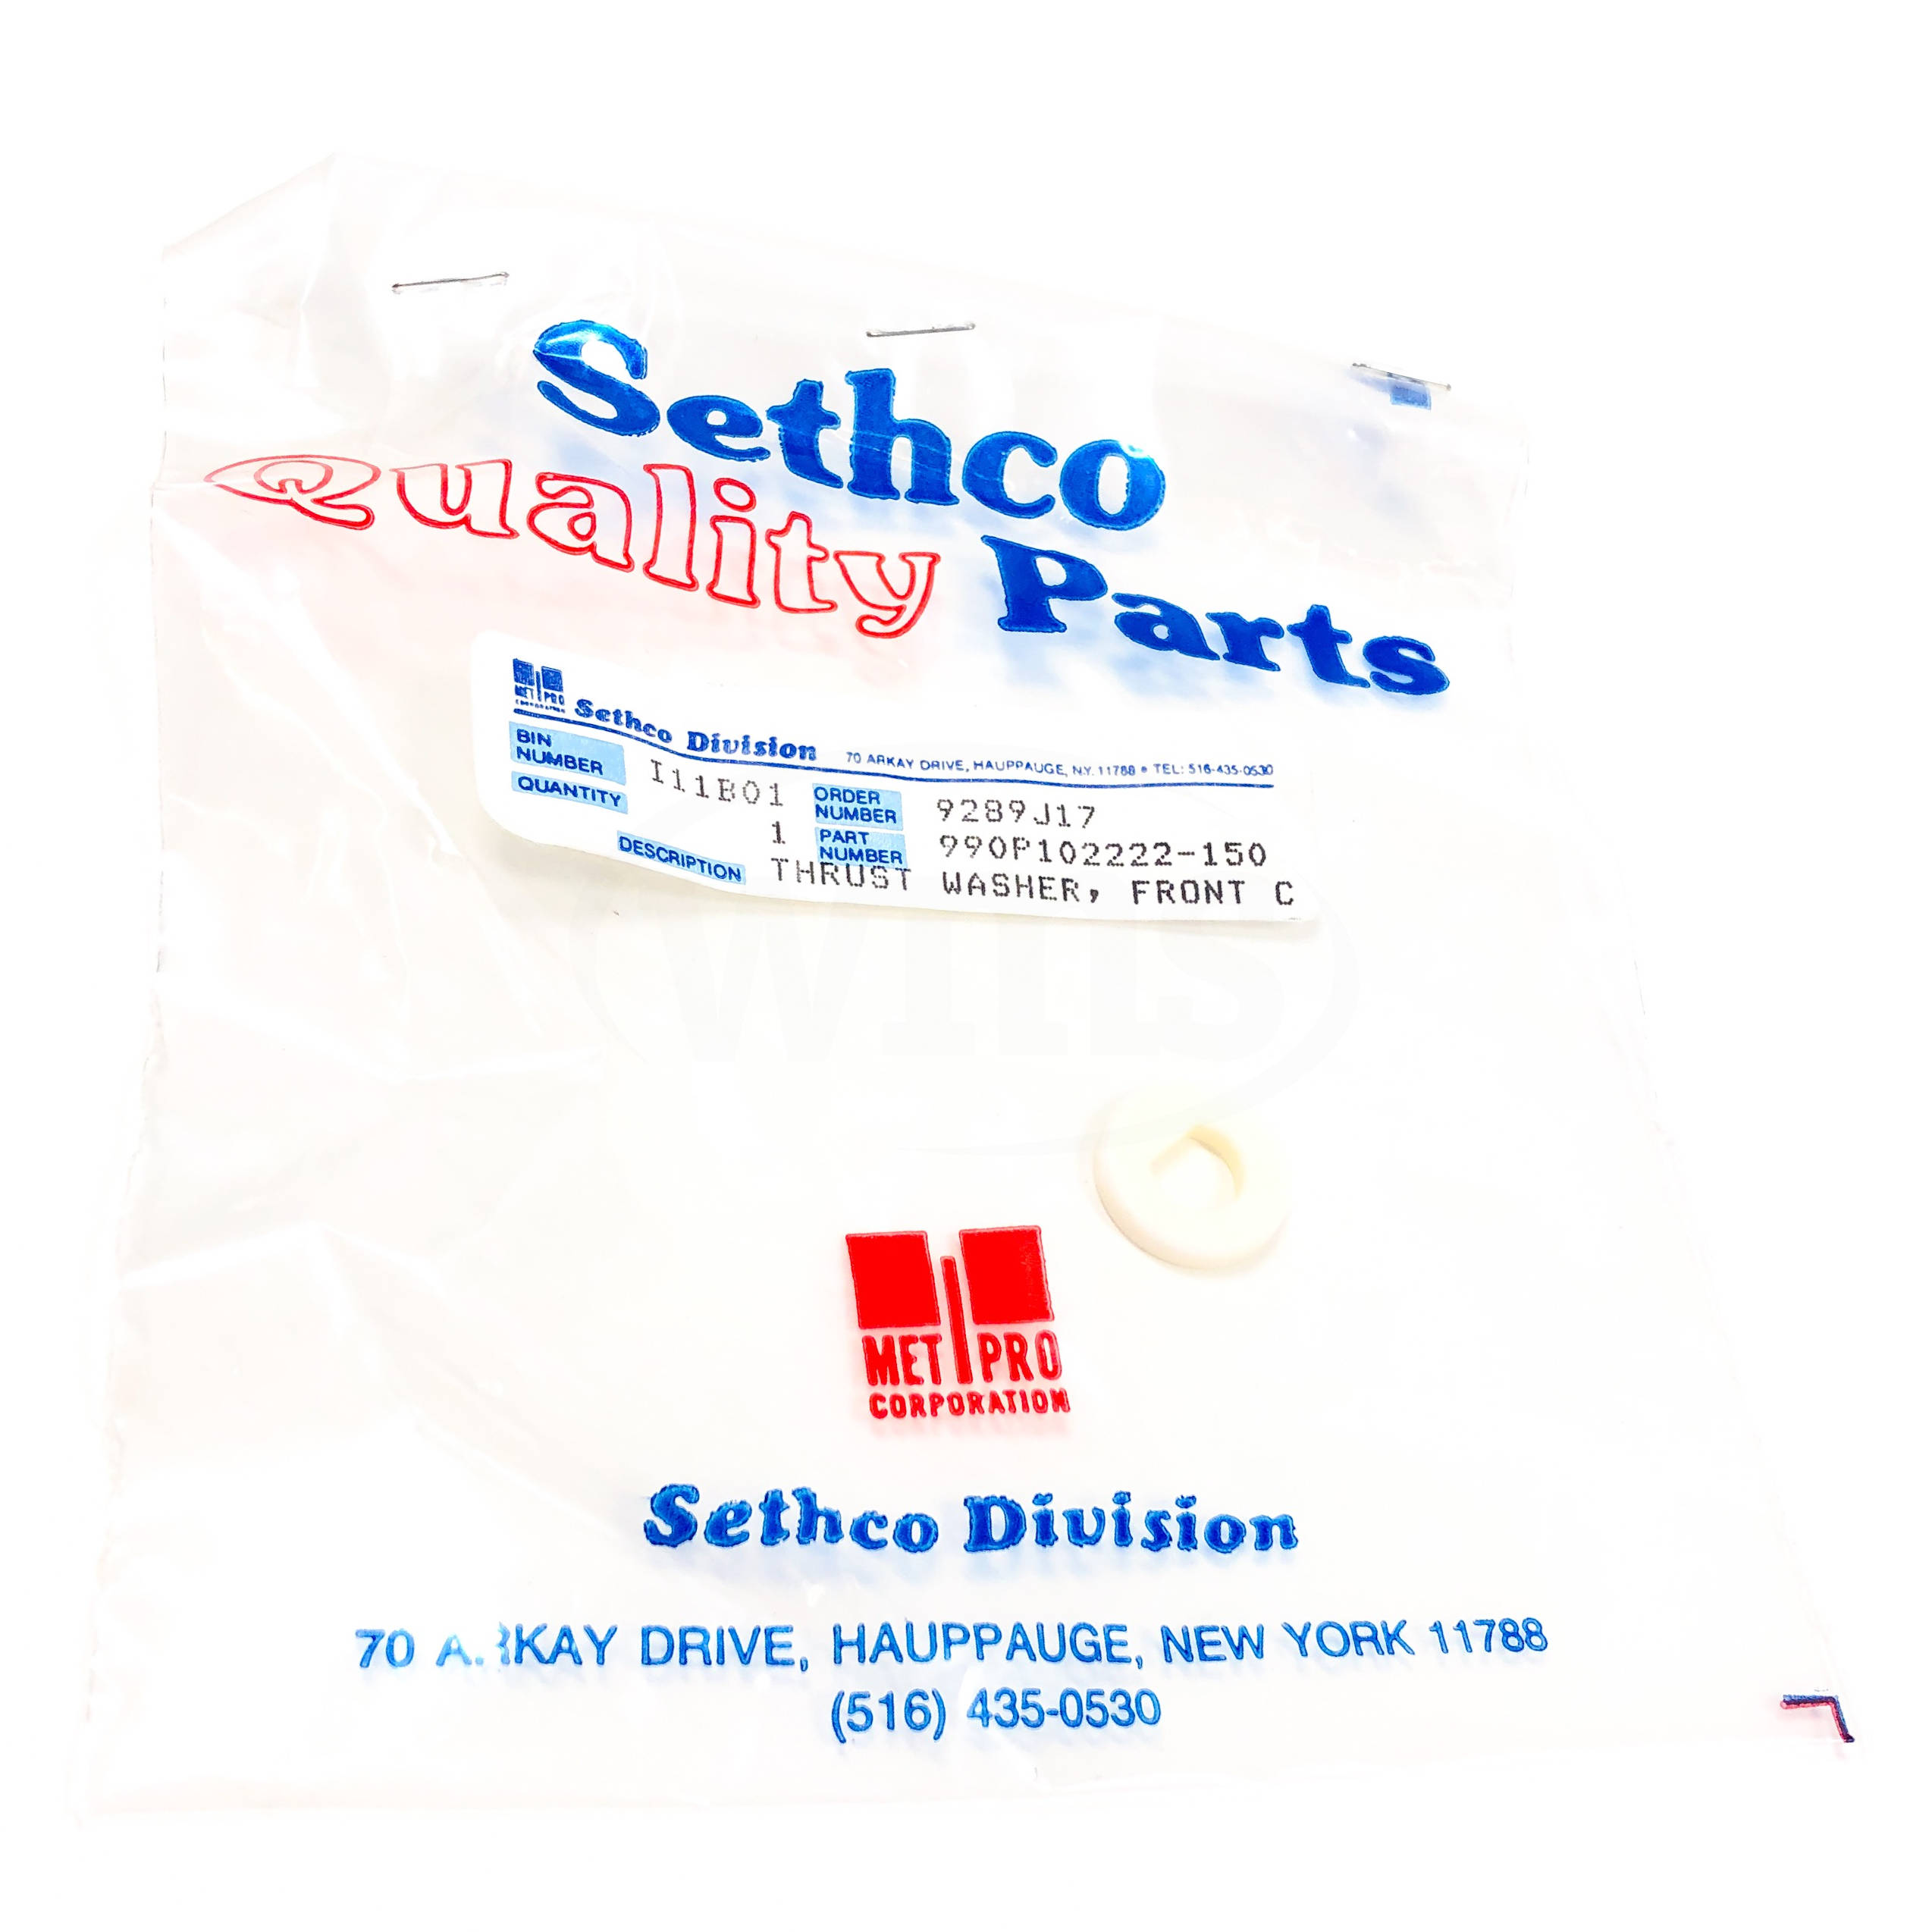 990P102222-150 Sethco Ceramic Thrust Washer, Front, 0.130 Thickness